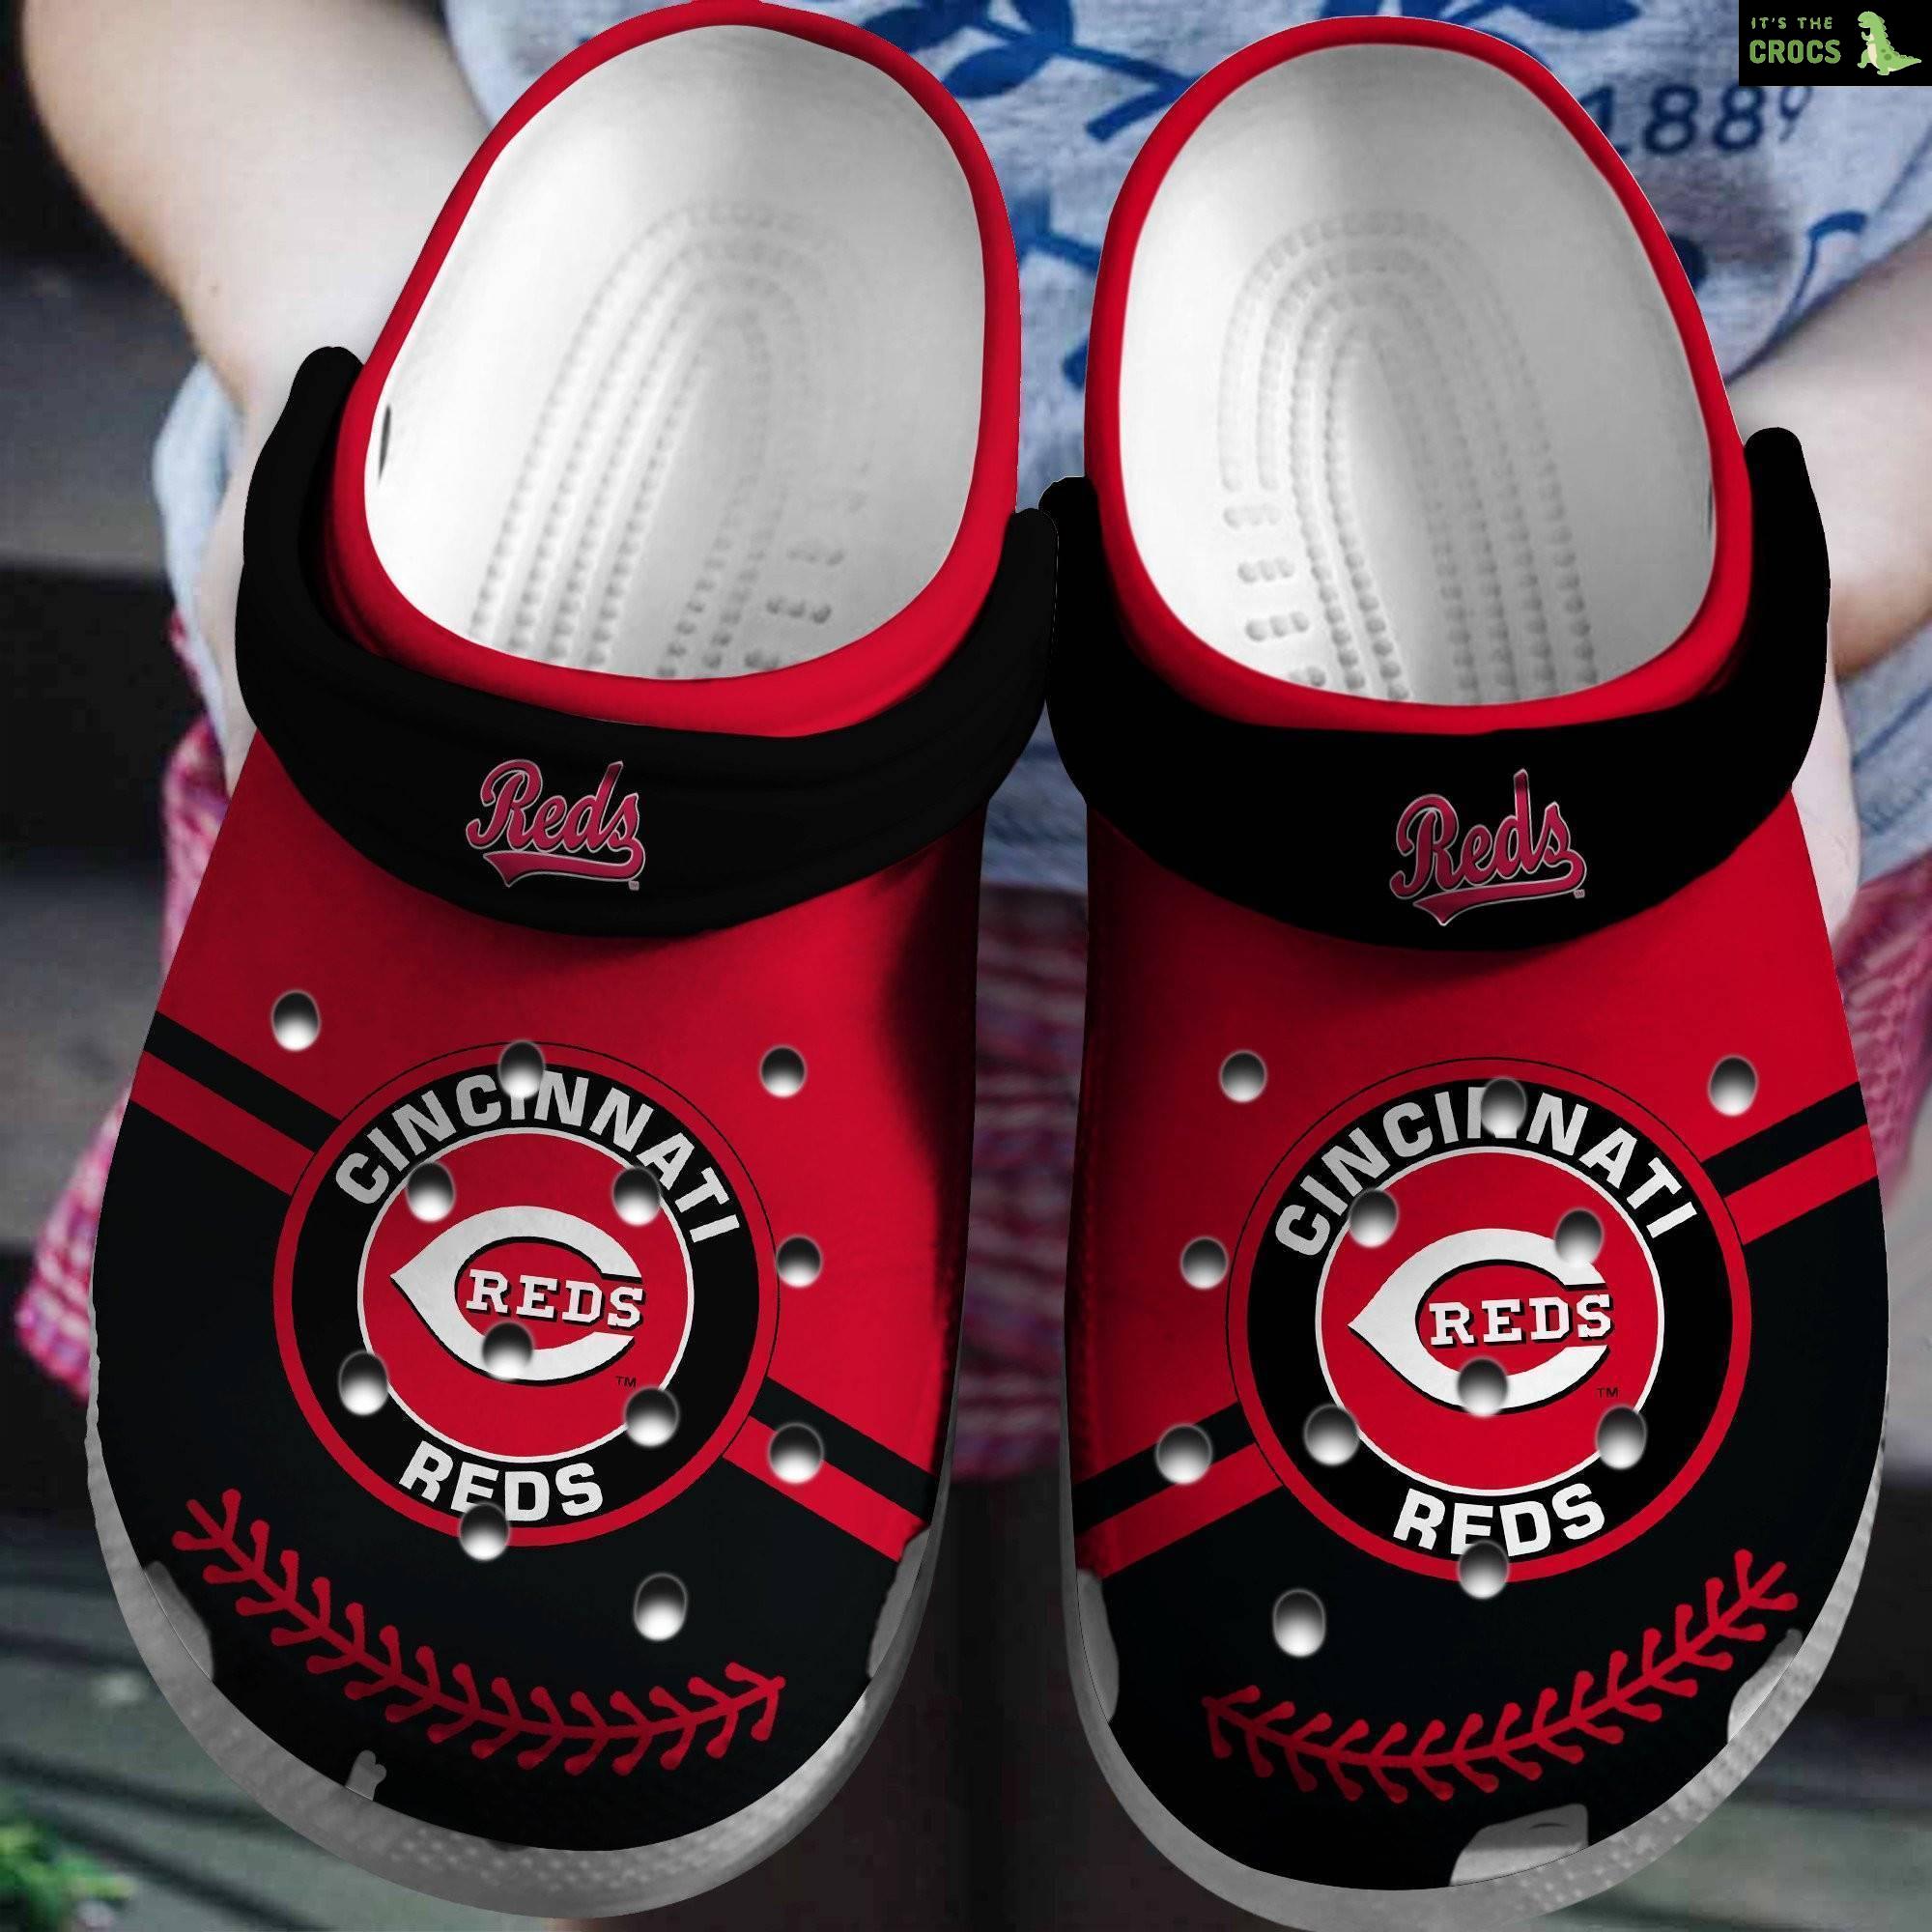 Hot Mlb Team Cincinnati Reds Red – Black Crocs Clog Shoesshoes Trusted Shopping Online In The World